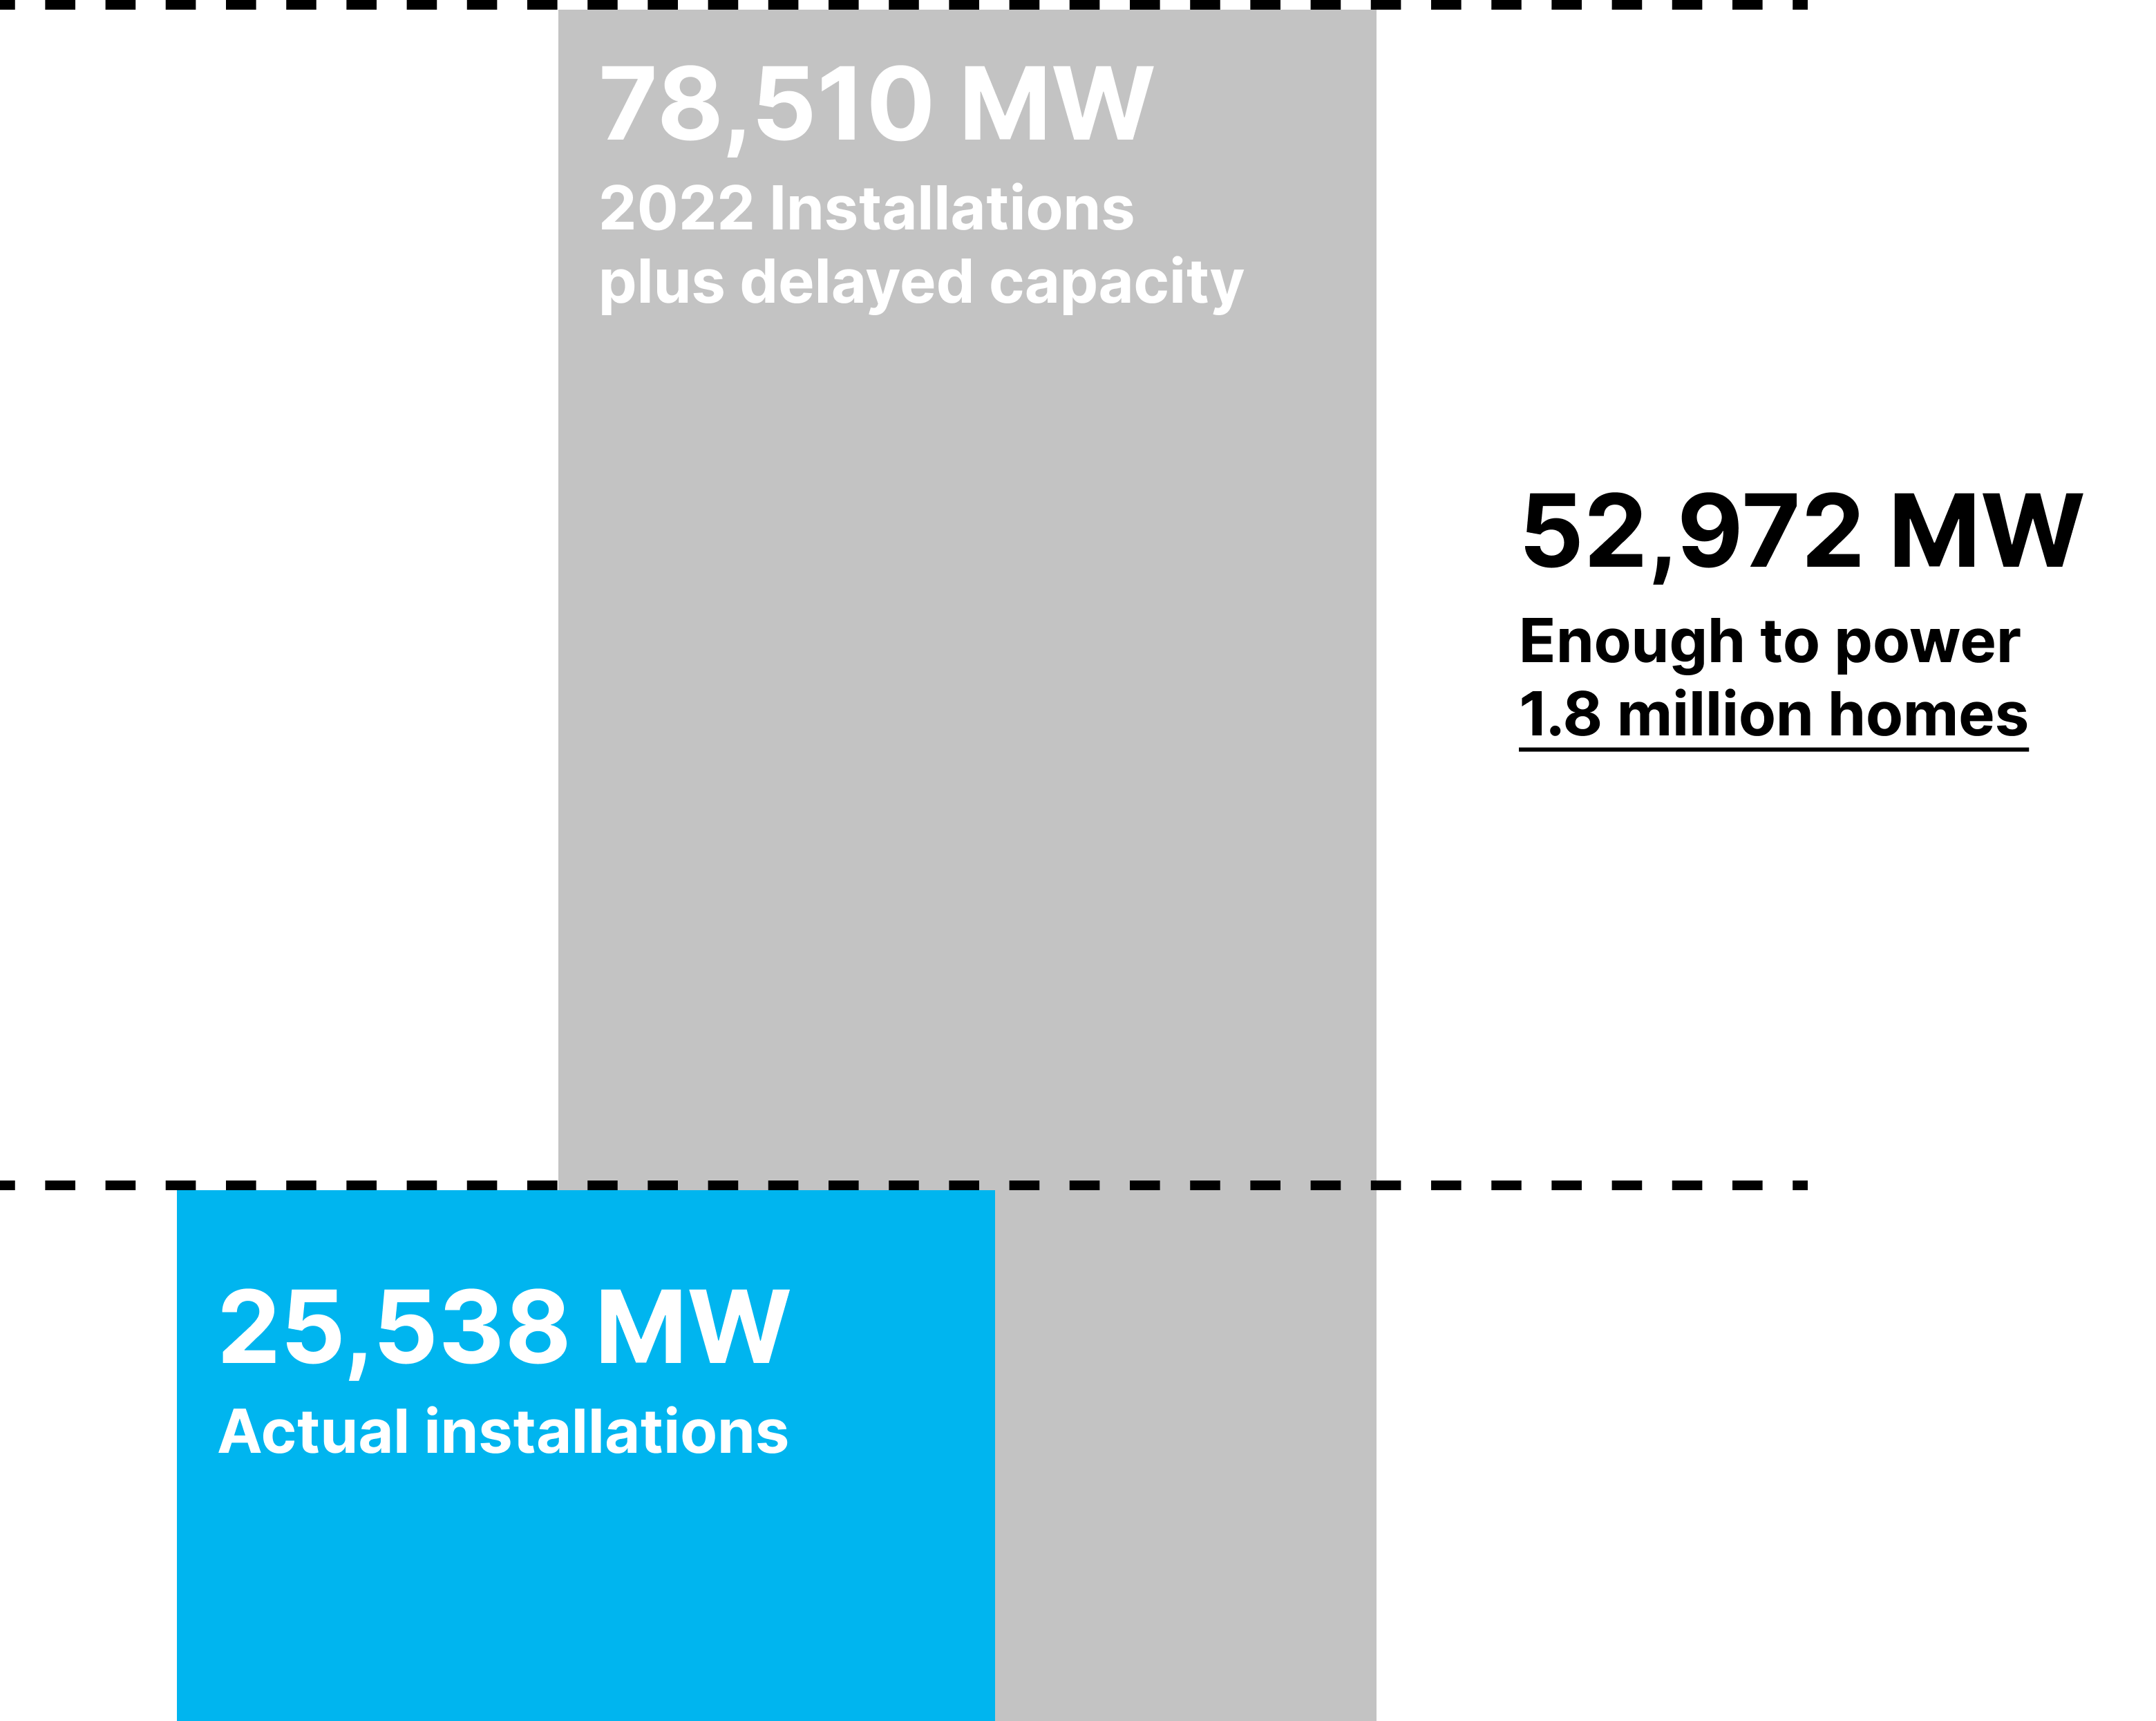 Graph displaying MW of Energy Project Installations versus Delayed Capacity.